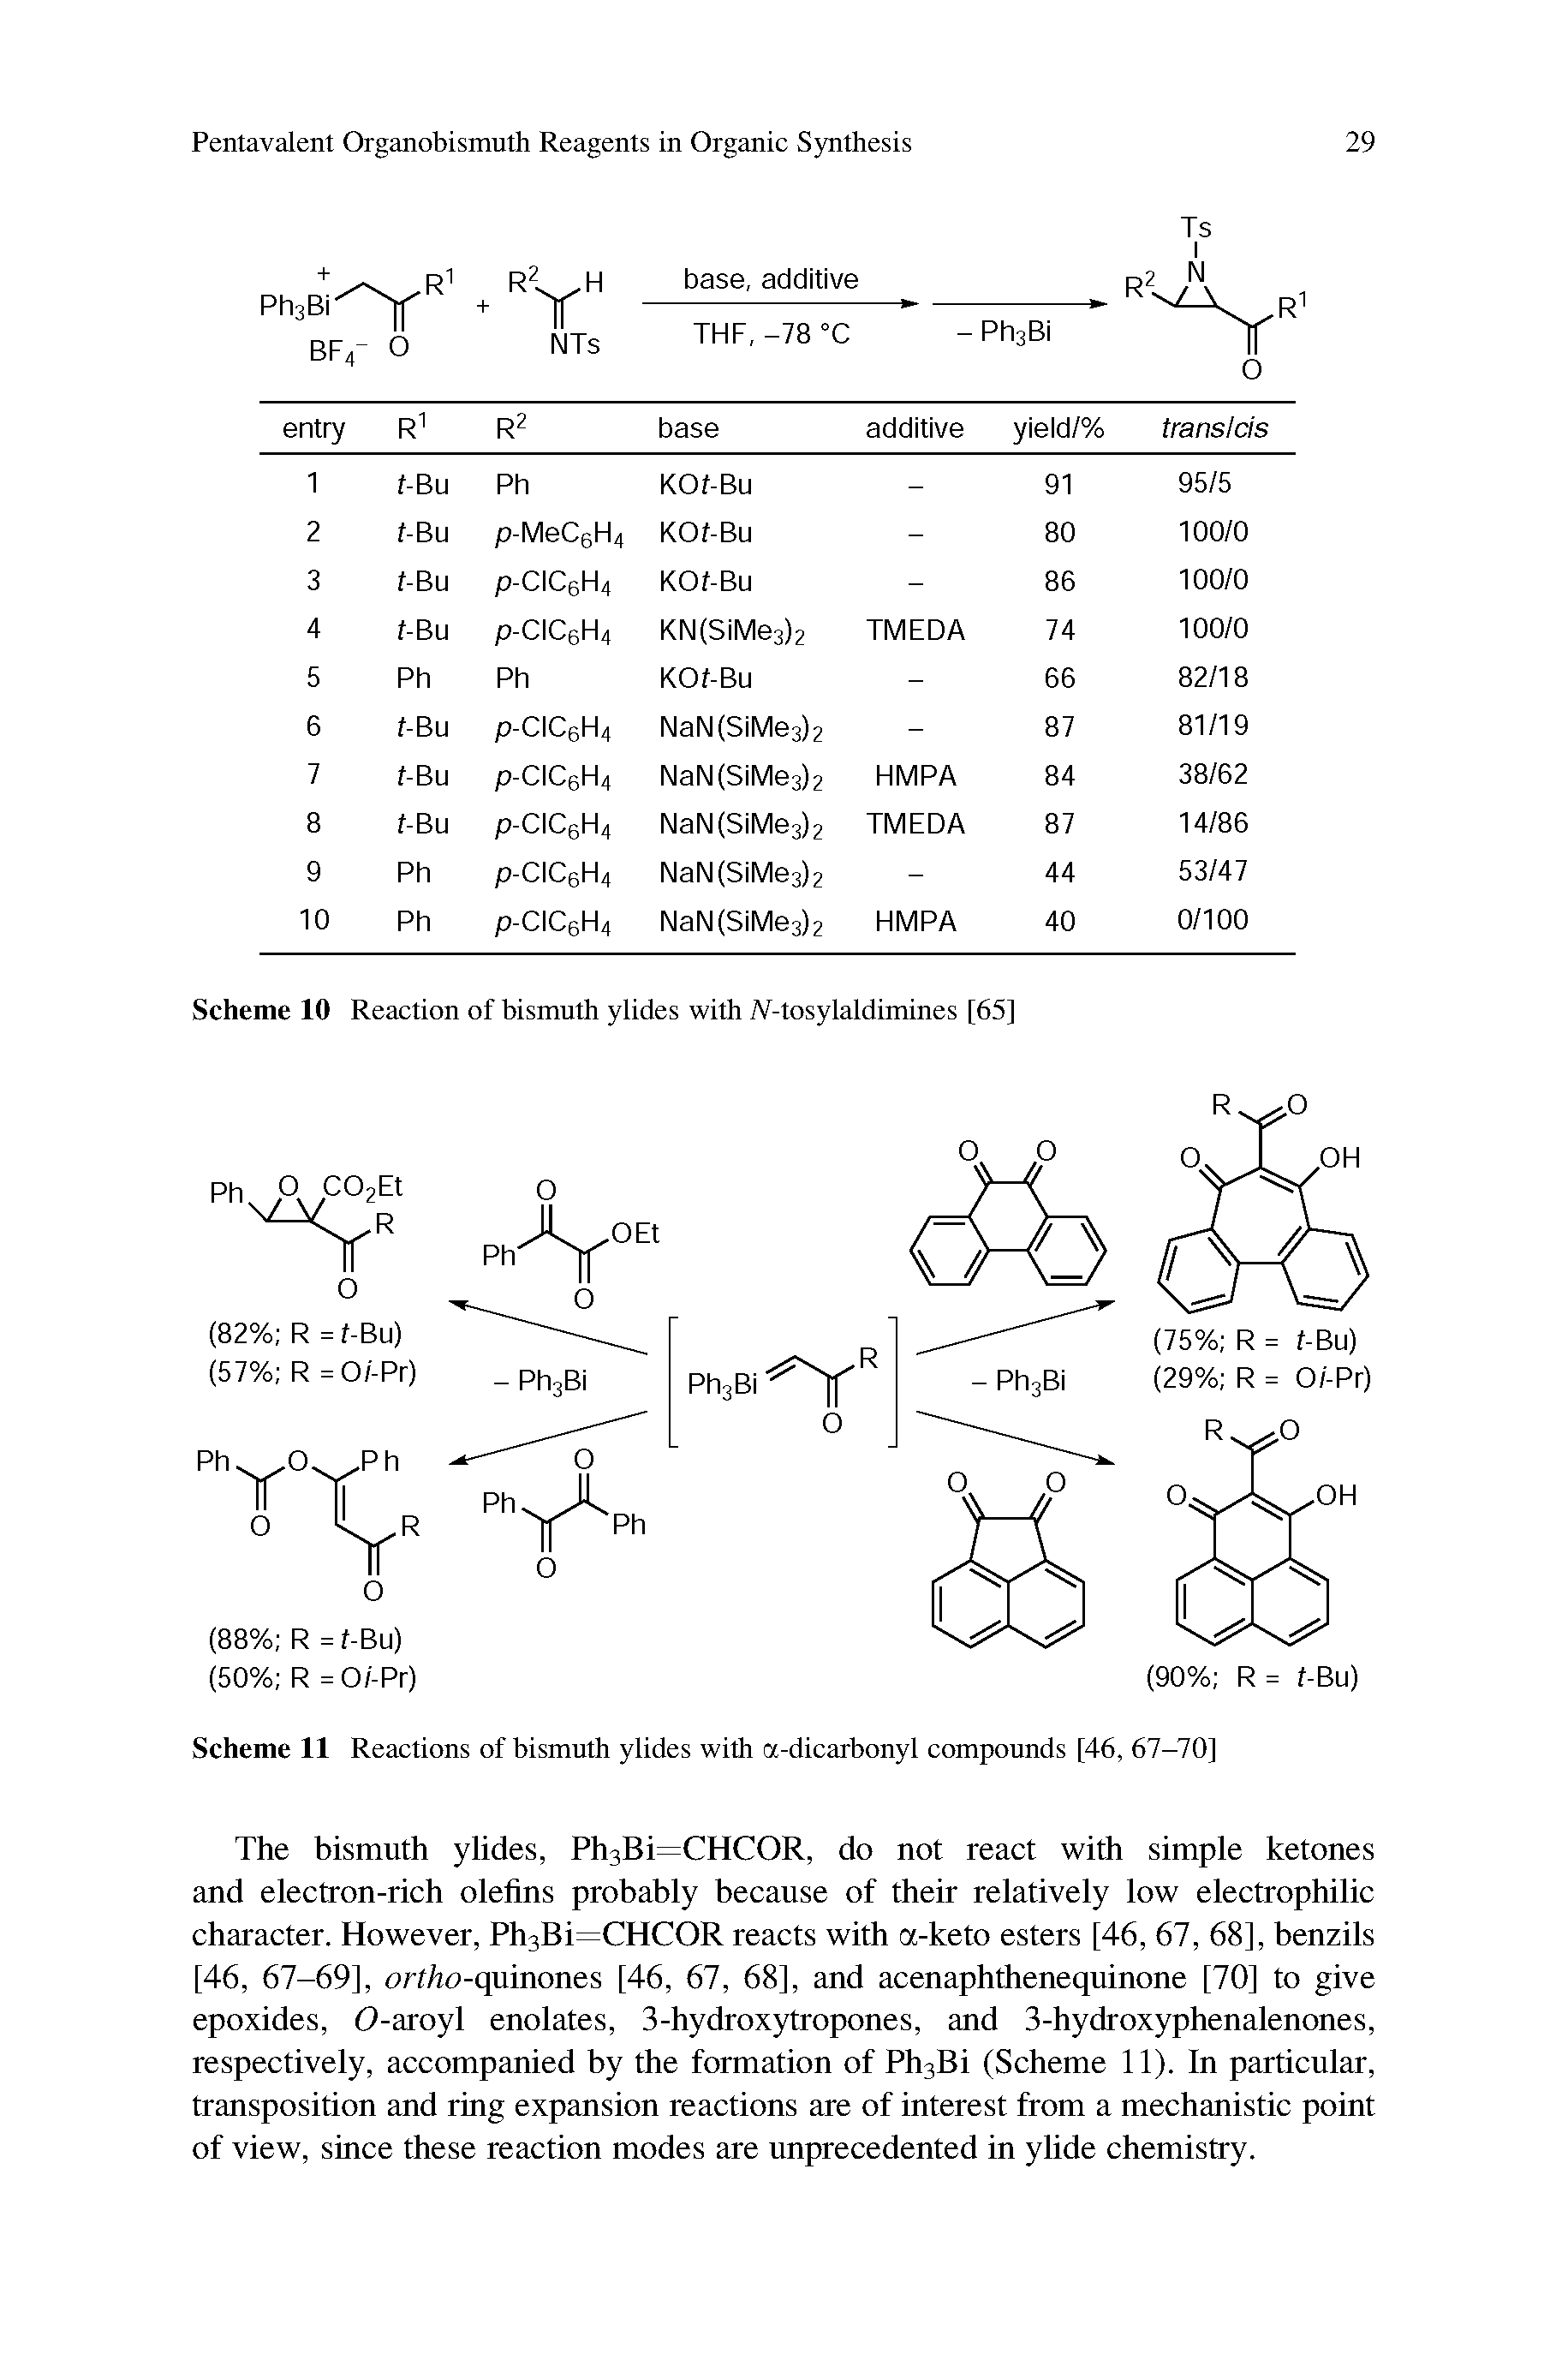 Scheme 11 Reactions of bismuth ylides with a-dicarbonyl compounds [46, 67-70]...